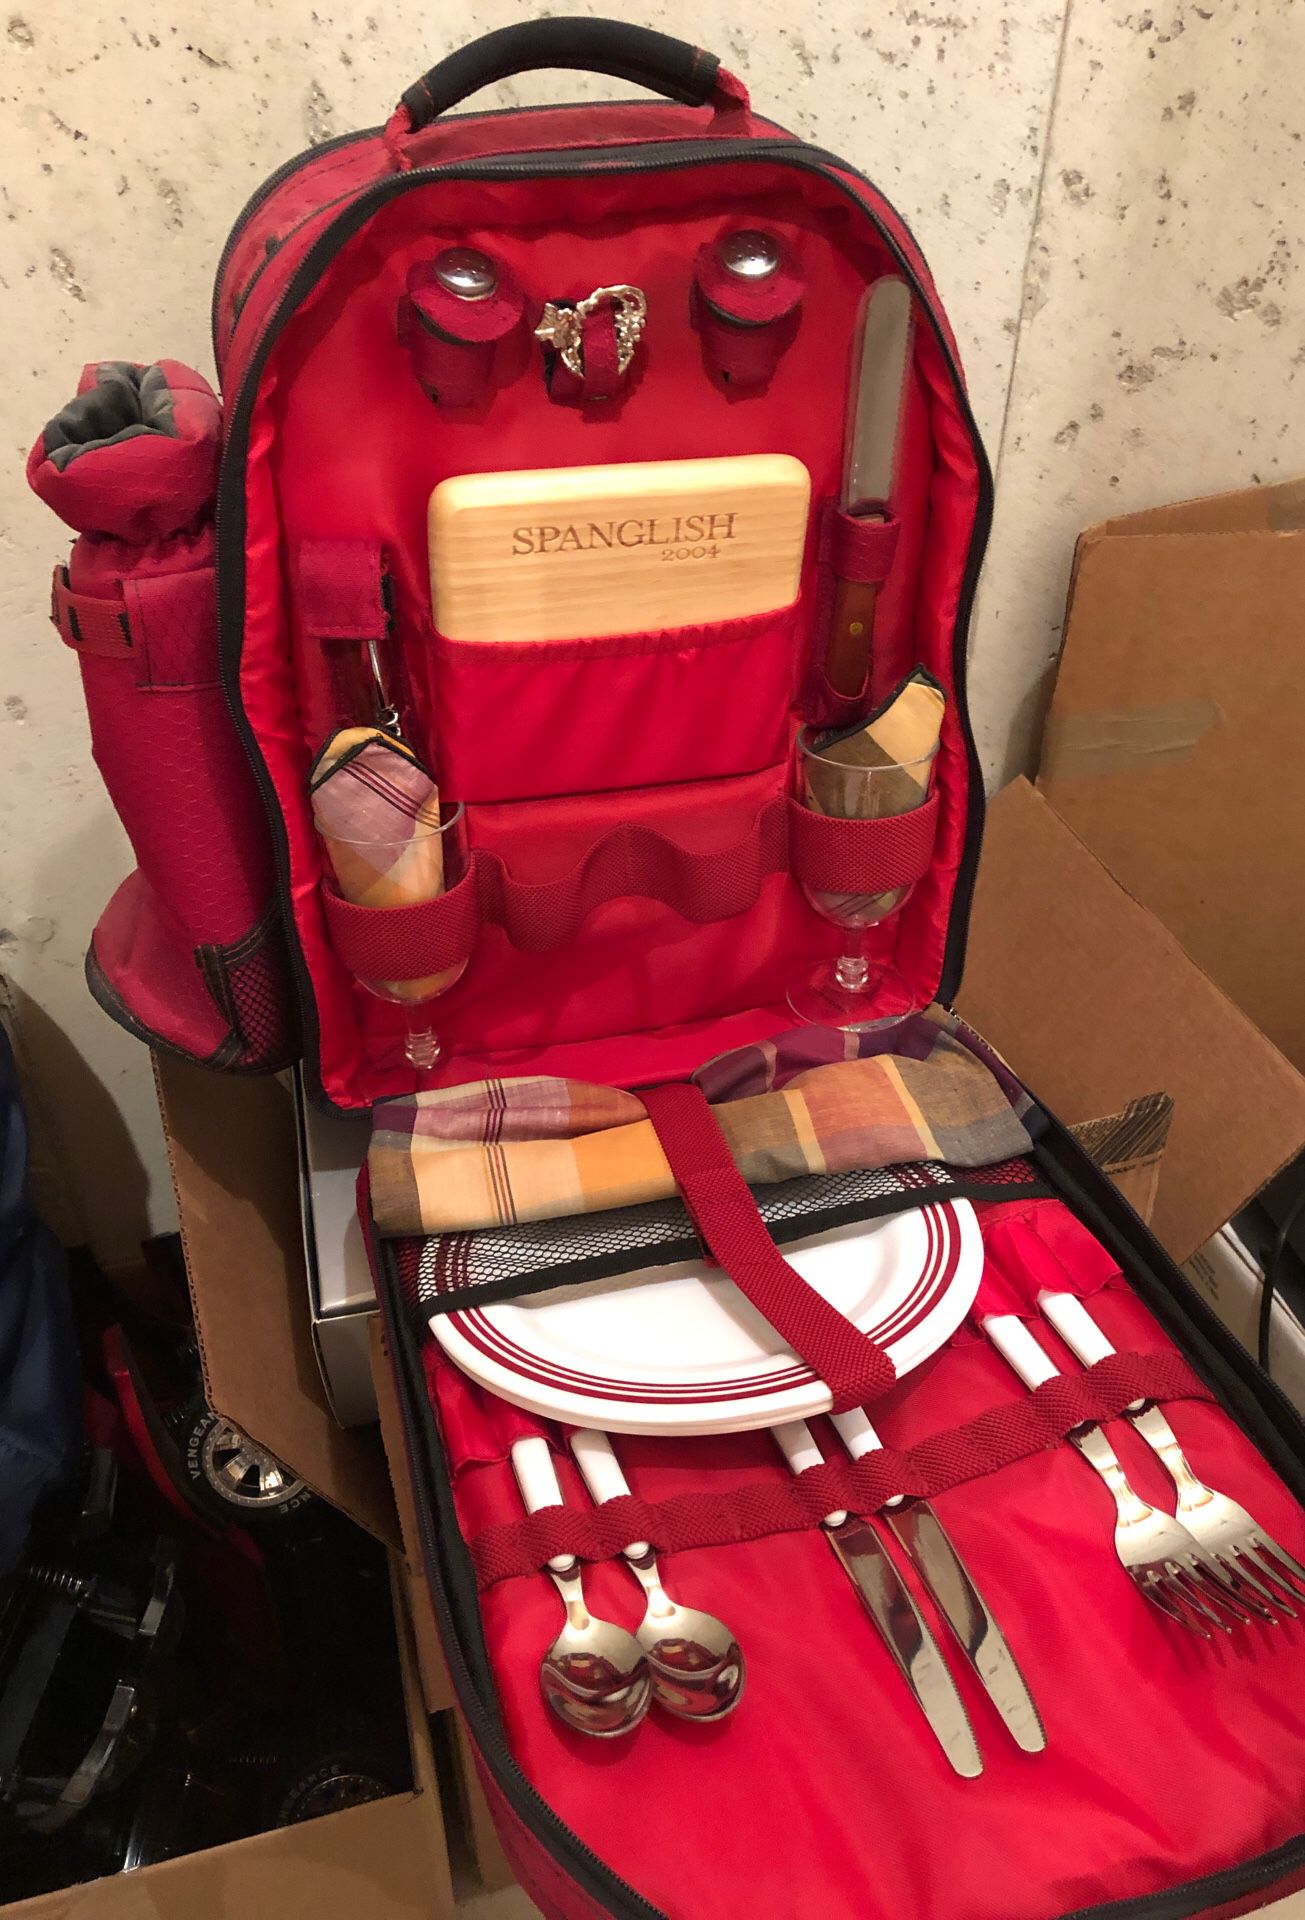 Picnic backpack - complete with dishes. Never used